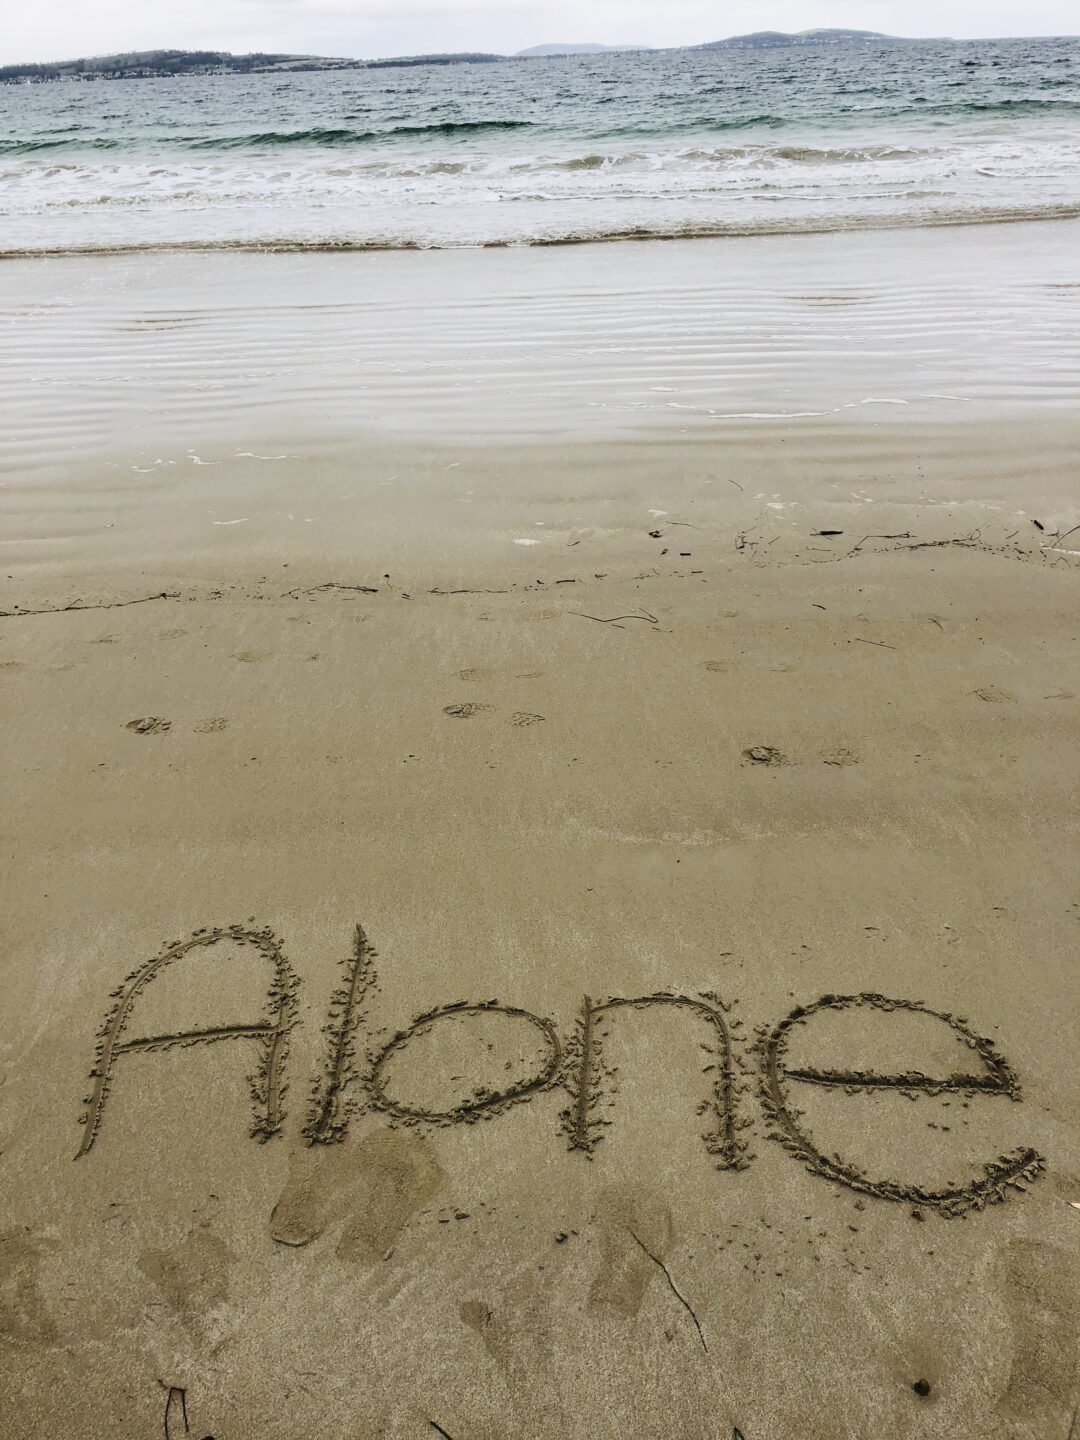 The word 'alone' written into the sand at a beach